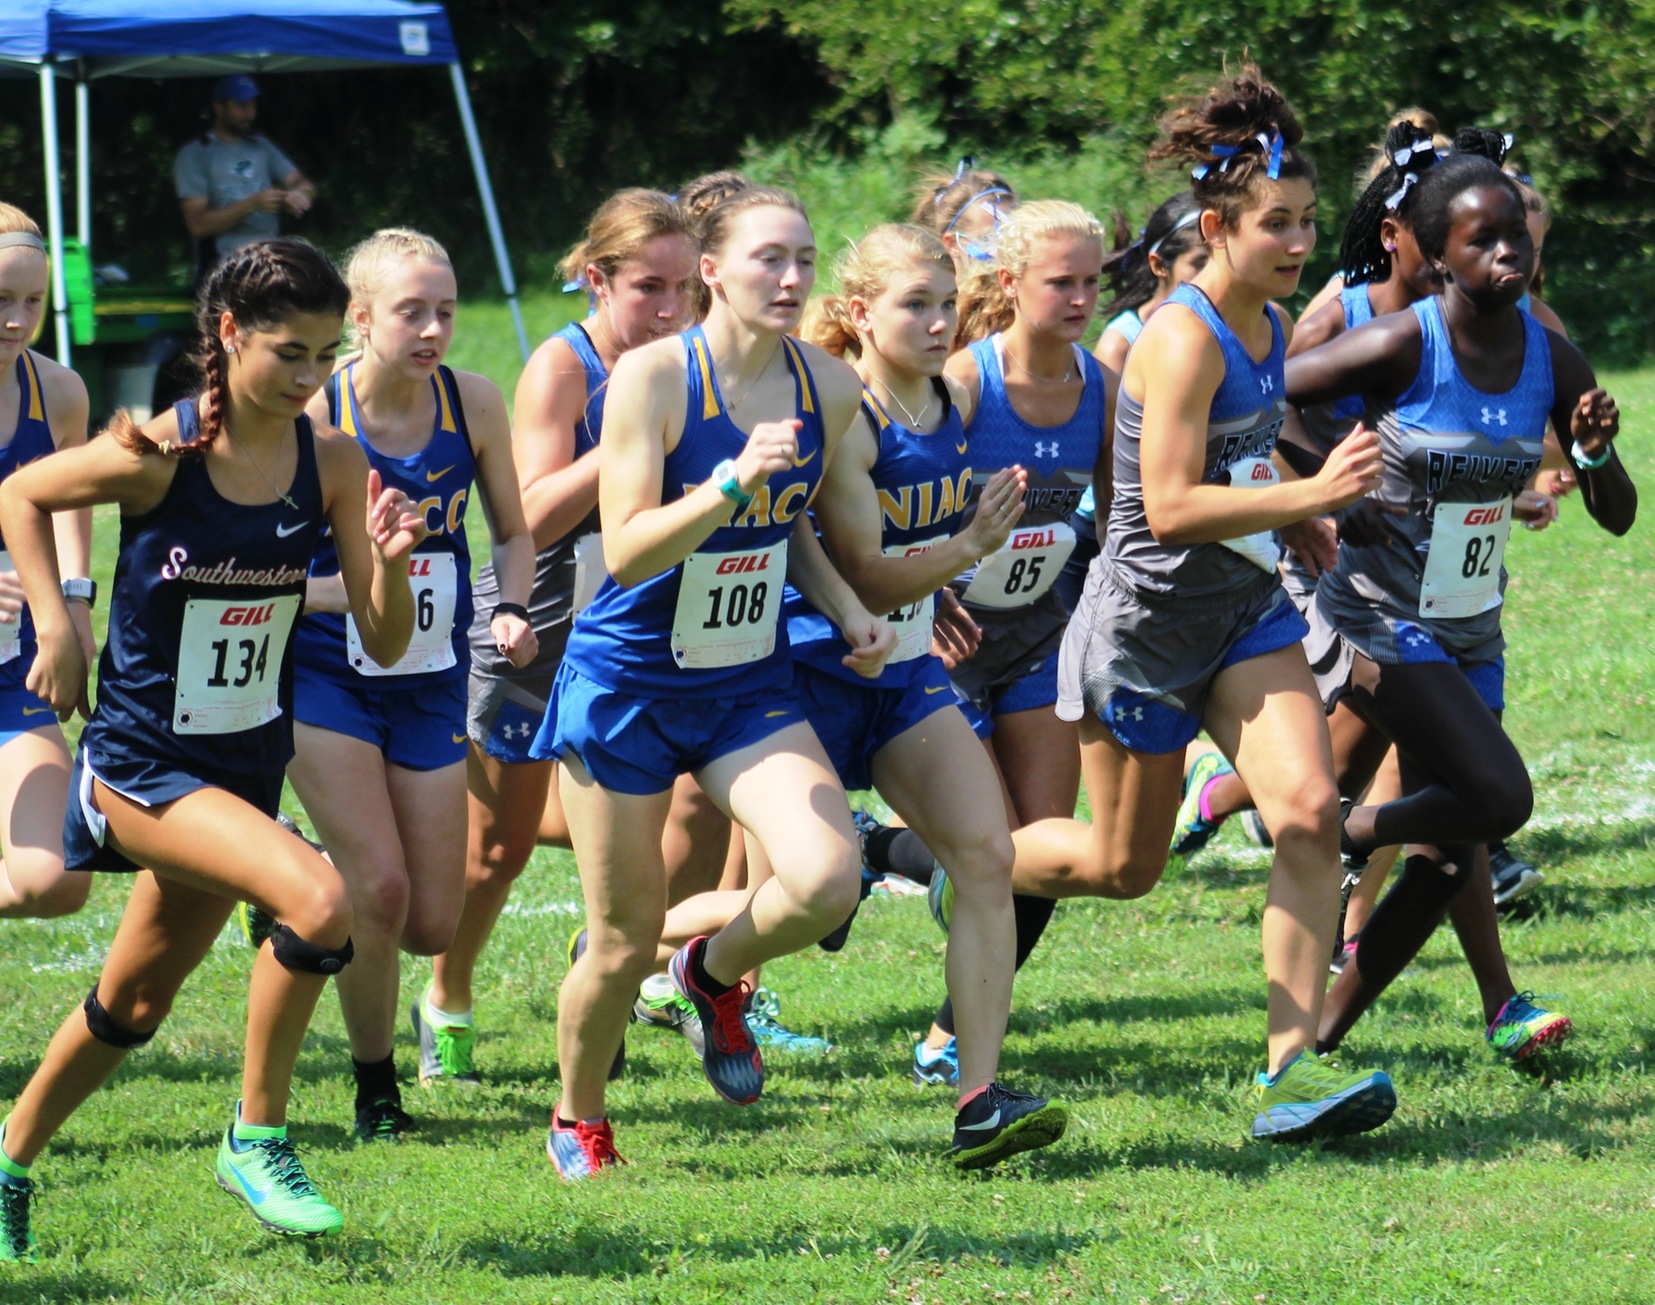 The NIACC women compete at the NJCAA Region XI meet in August.